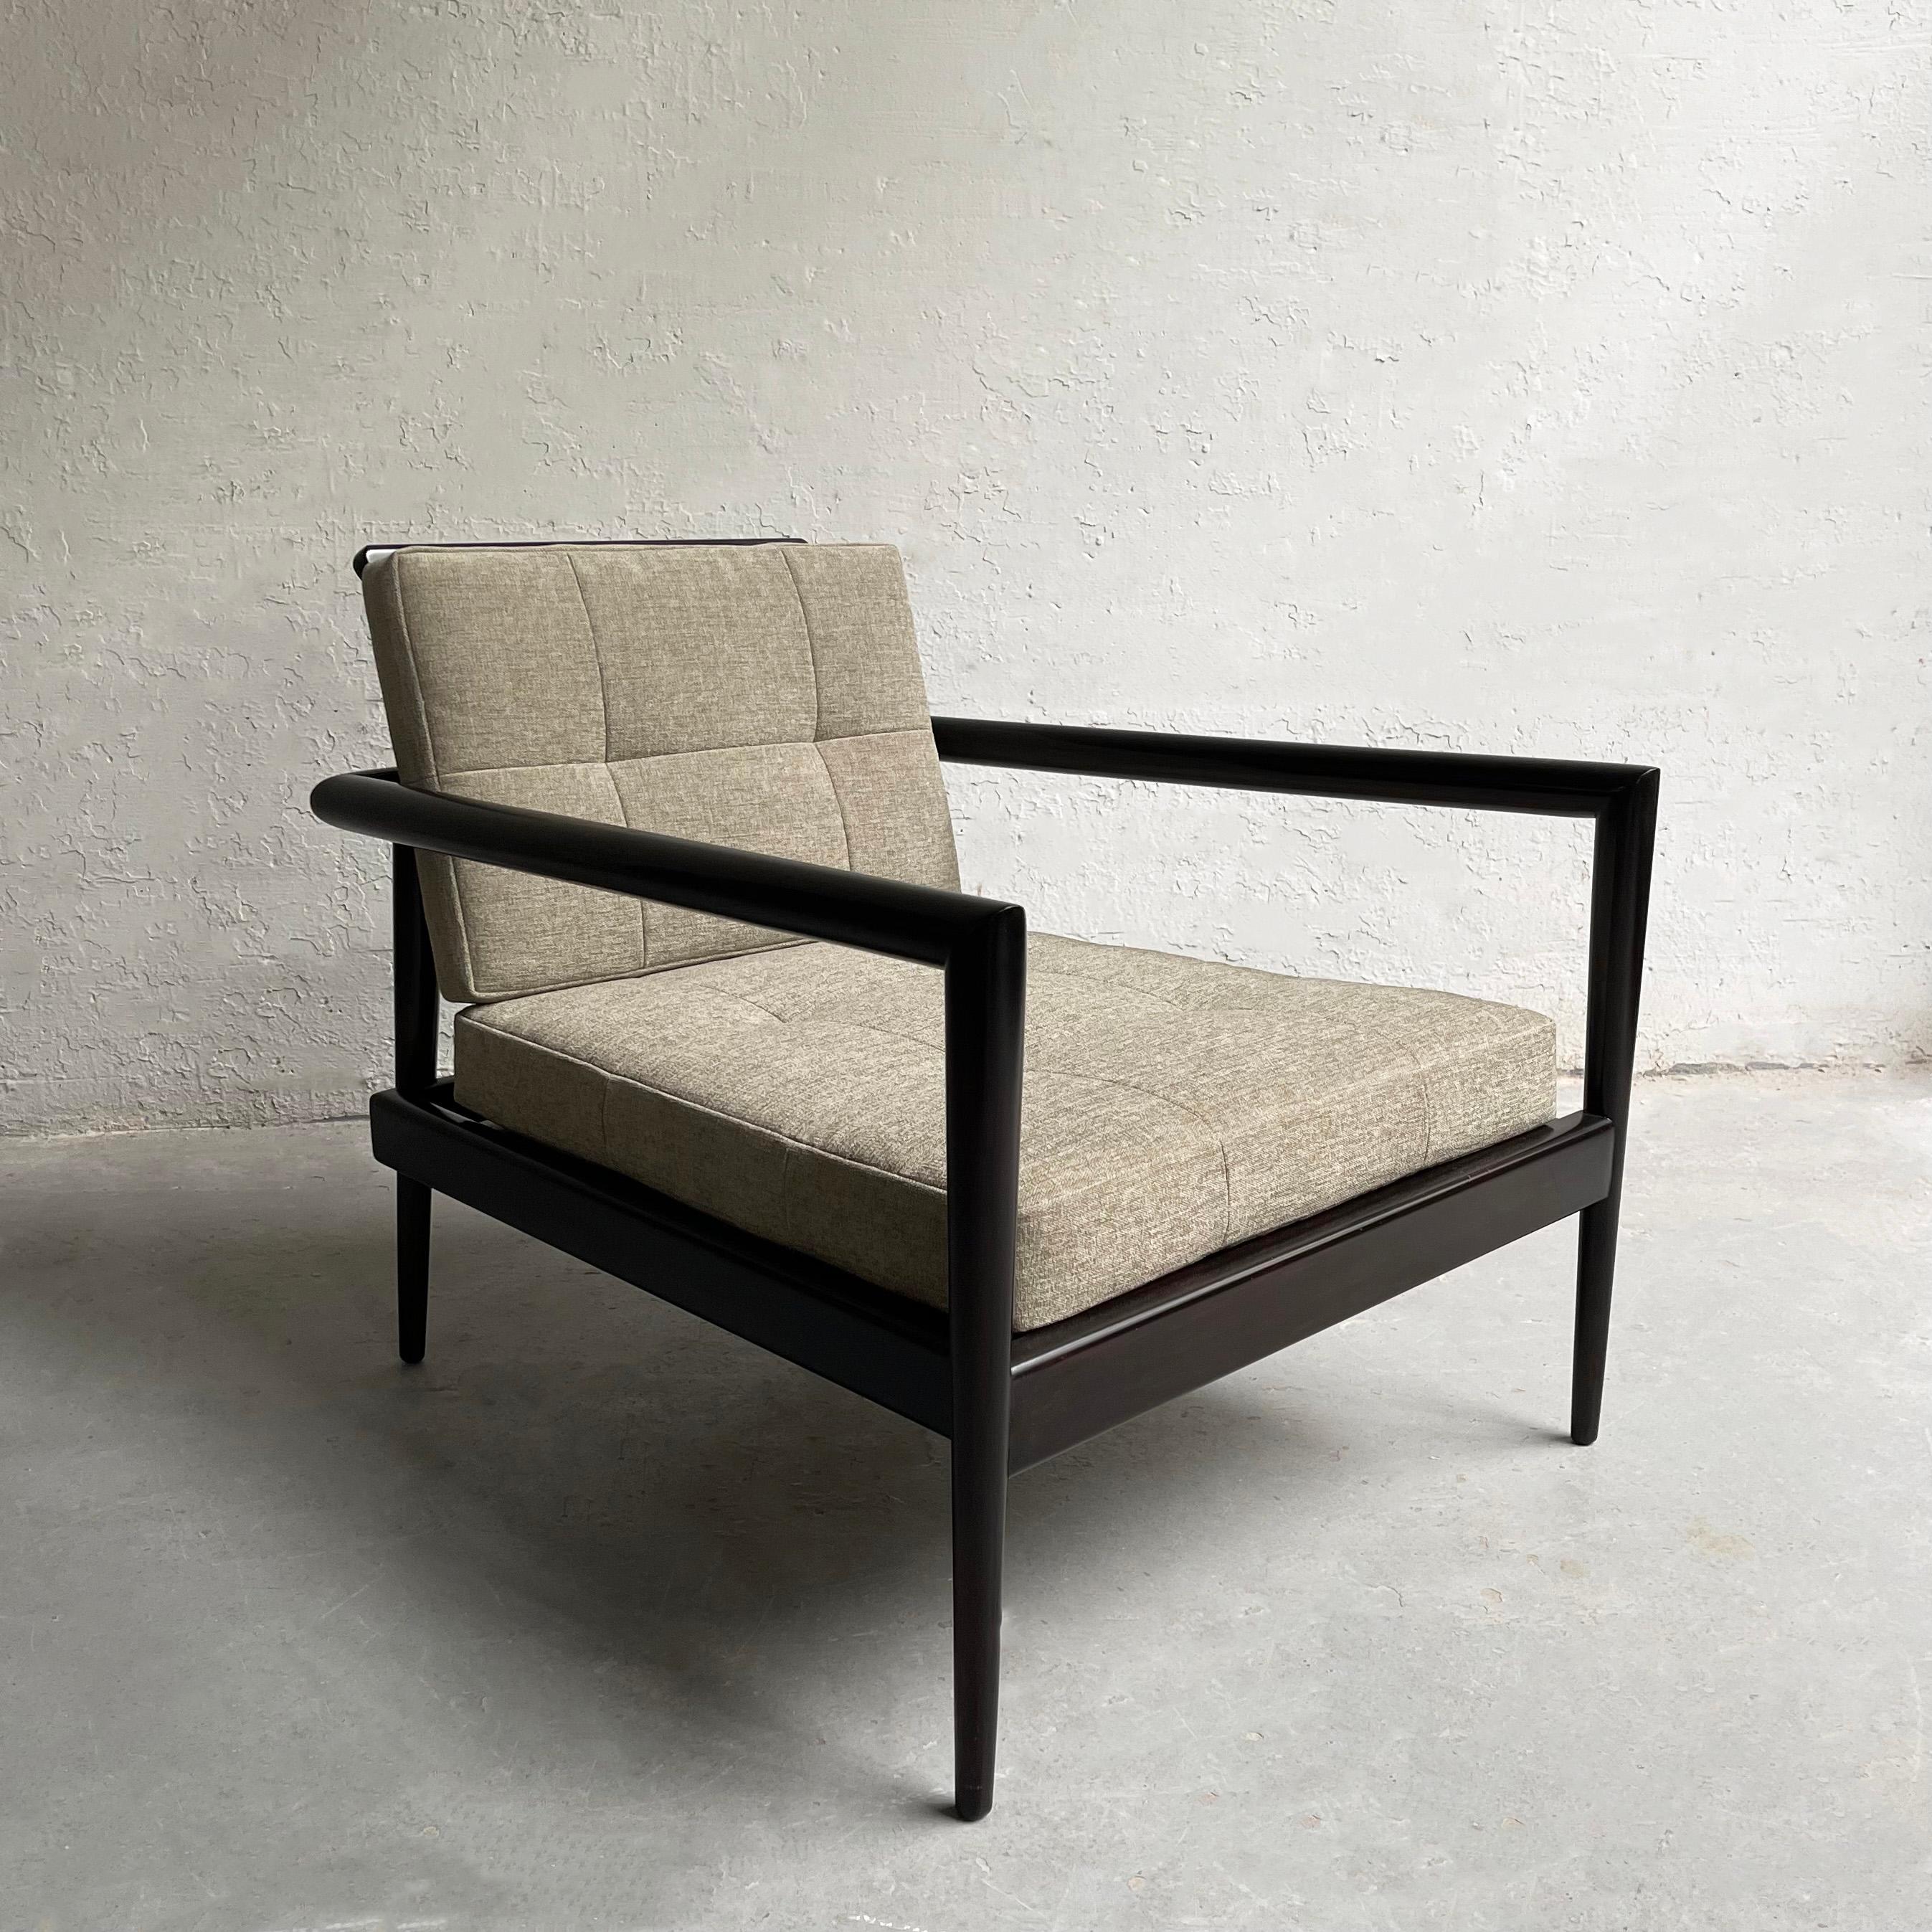 Mid-Century Modern, low profile, lounge chair by Paul McCobb for Winchendon features a deep seated, black lacquered maple frame with spindle back and newly upholstered cushions in segmented gray blue chenille.